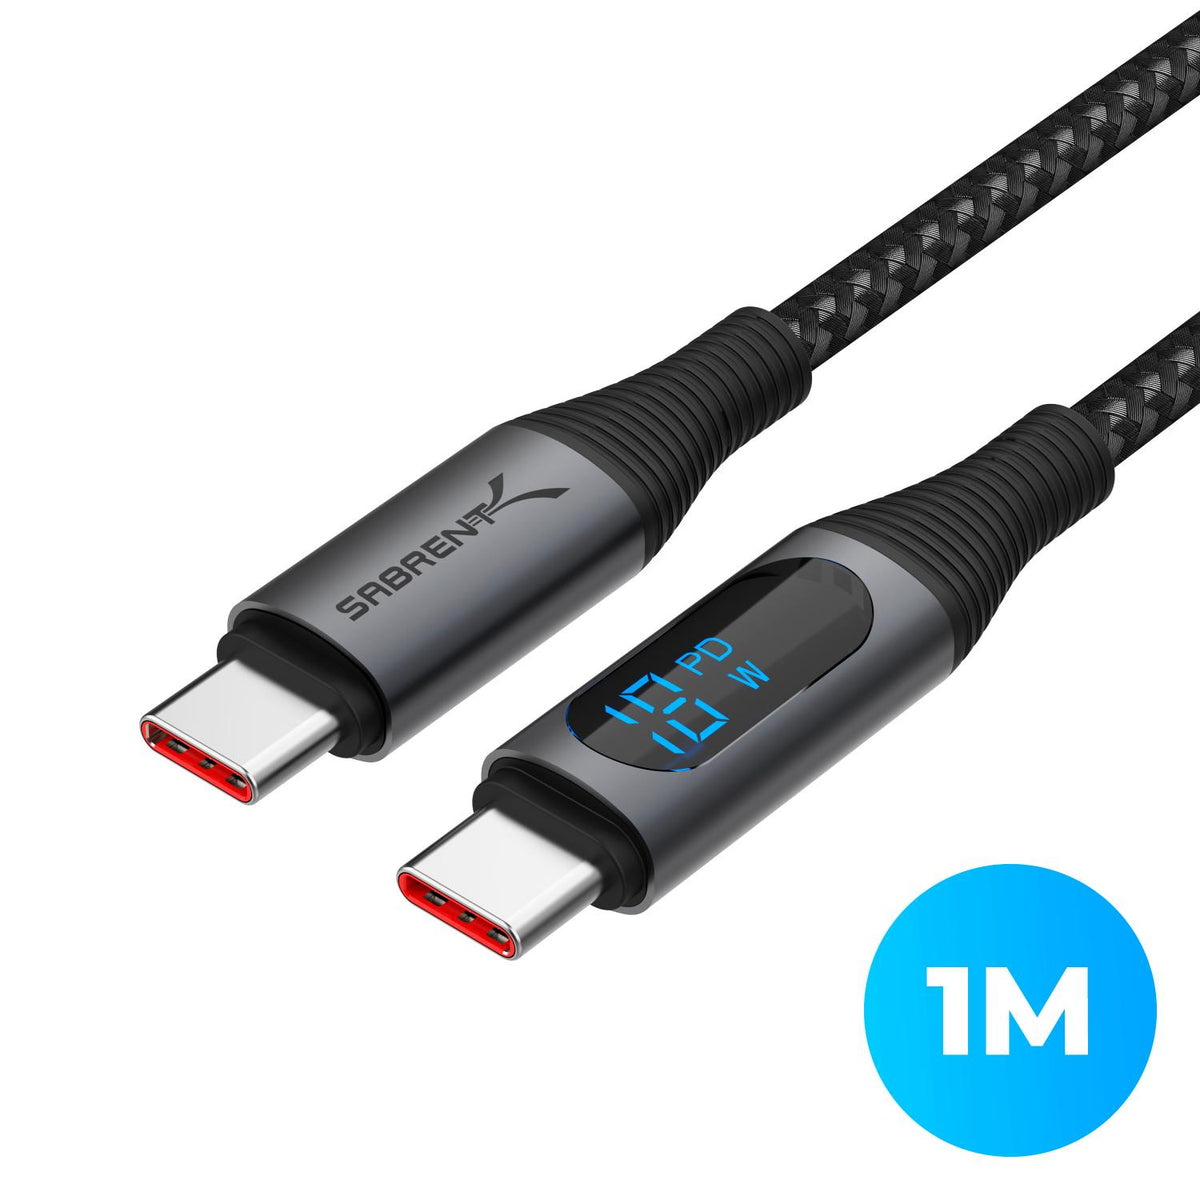 USB C to USB C Charging Cable with Smart Display